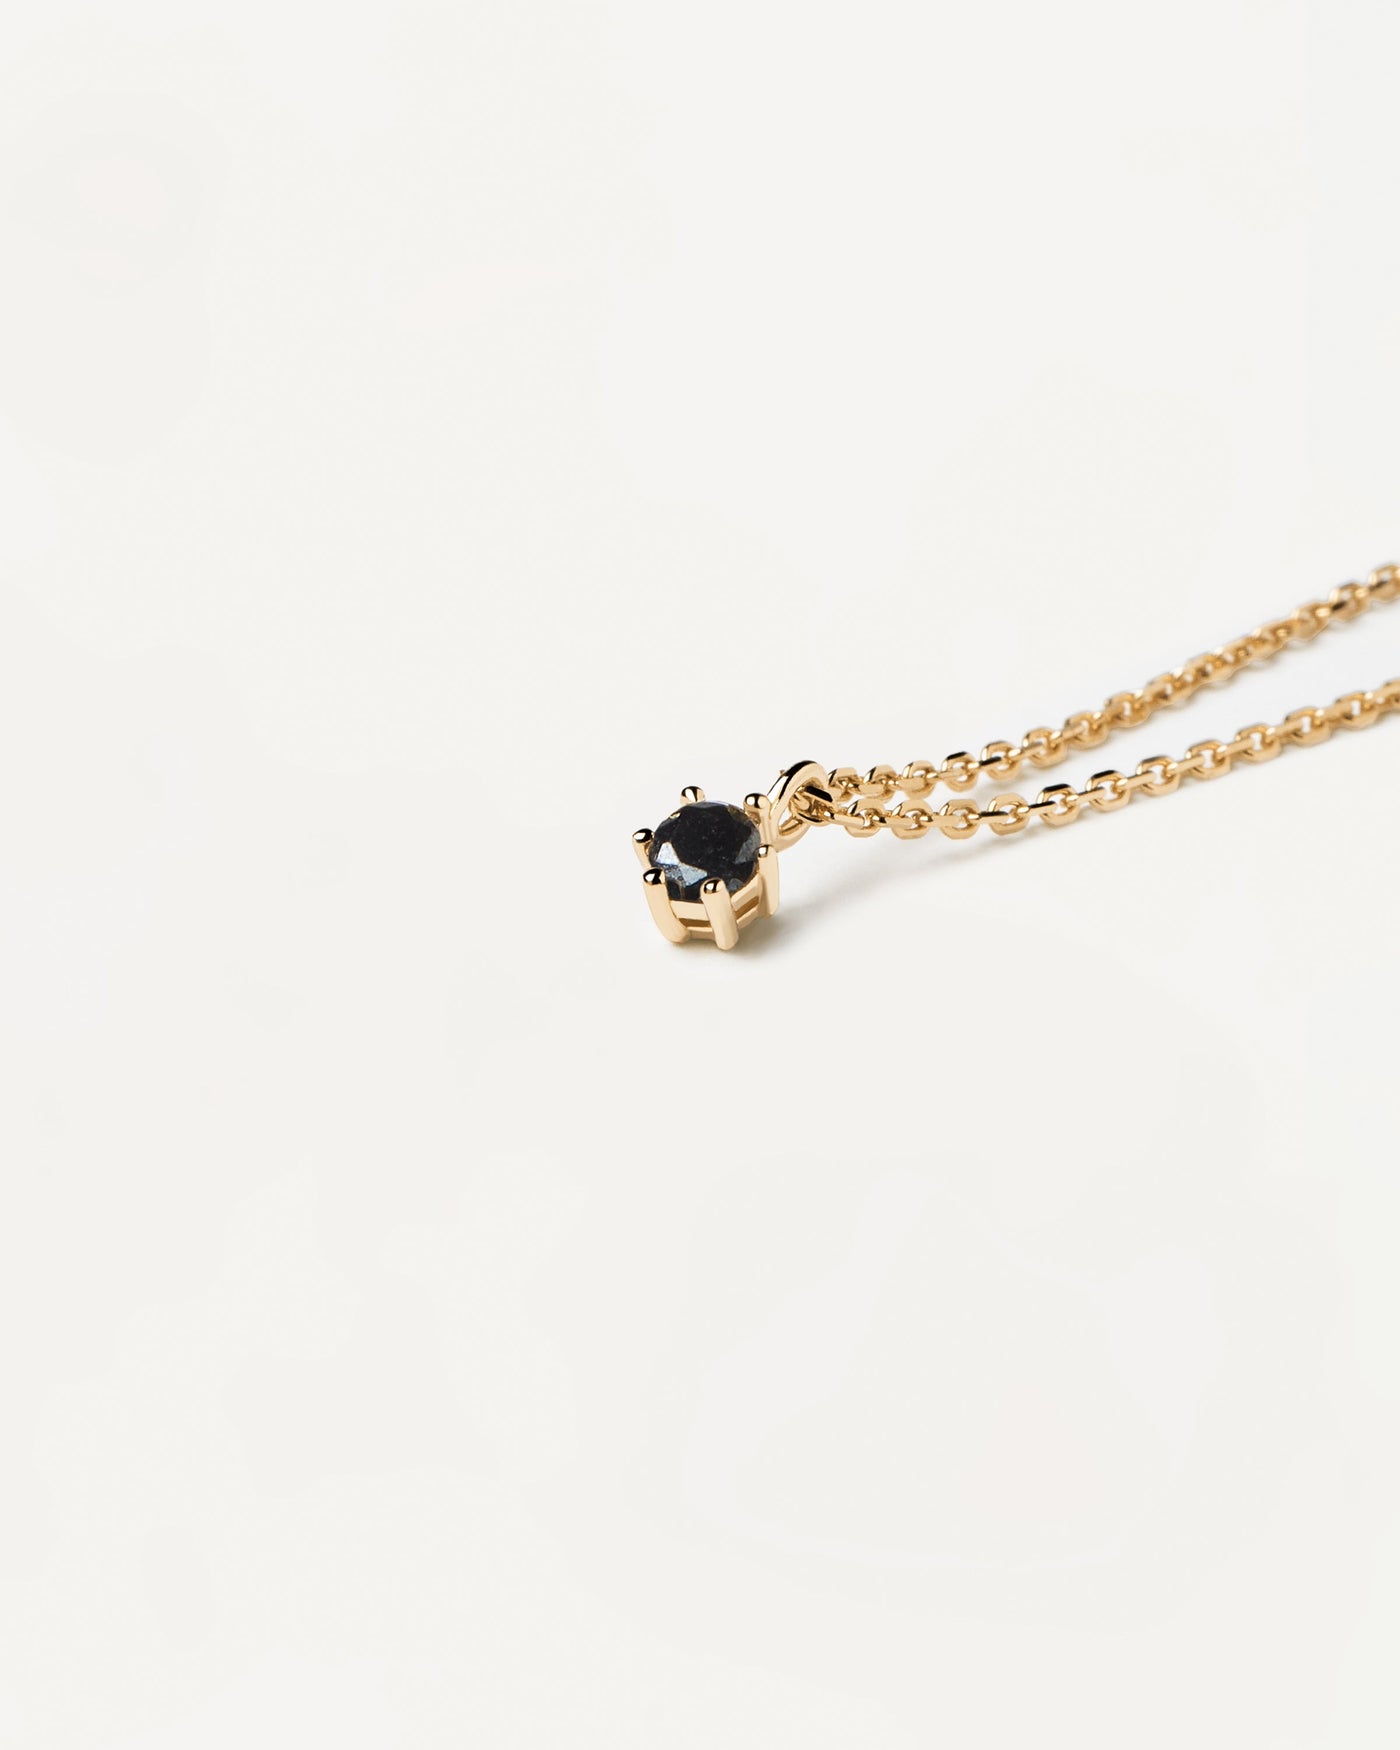 2023 Selection | Black Solitary Necklace. Single link chain in 18k gold plated silver with a black zirconia on prongs. Get the latest arrival from PDPAOLA. Place your order safely and get this Best Seller. Free Shipping.